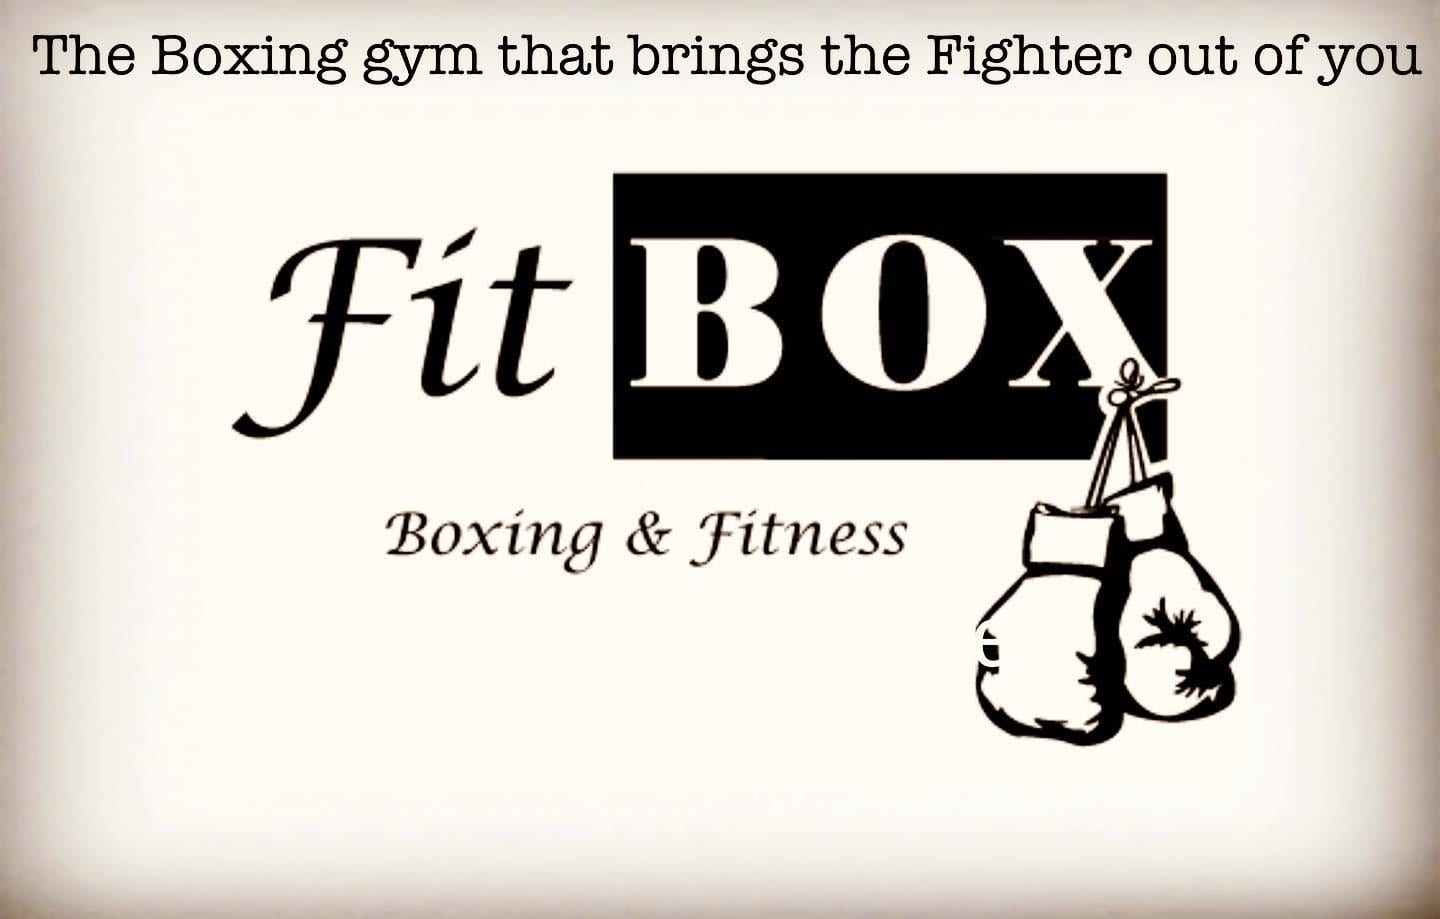 We all have a fighter in us. At FitBOX we give you the full Boxing experience and the best Boxing workout around that is guaranteed to bring that fighter out. Contact us to Sign up to try a Free Boxing workout at Call/text (781)727-9503 or email fitbox@outlook.com 
.